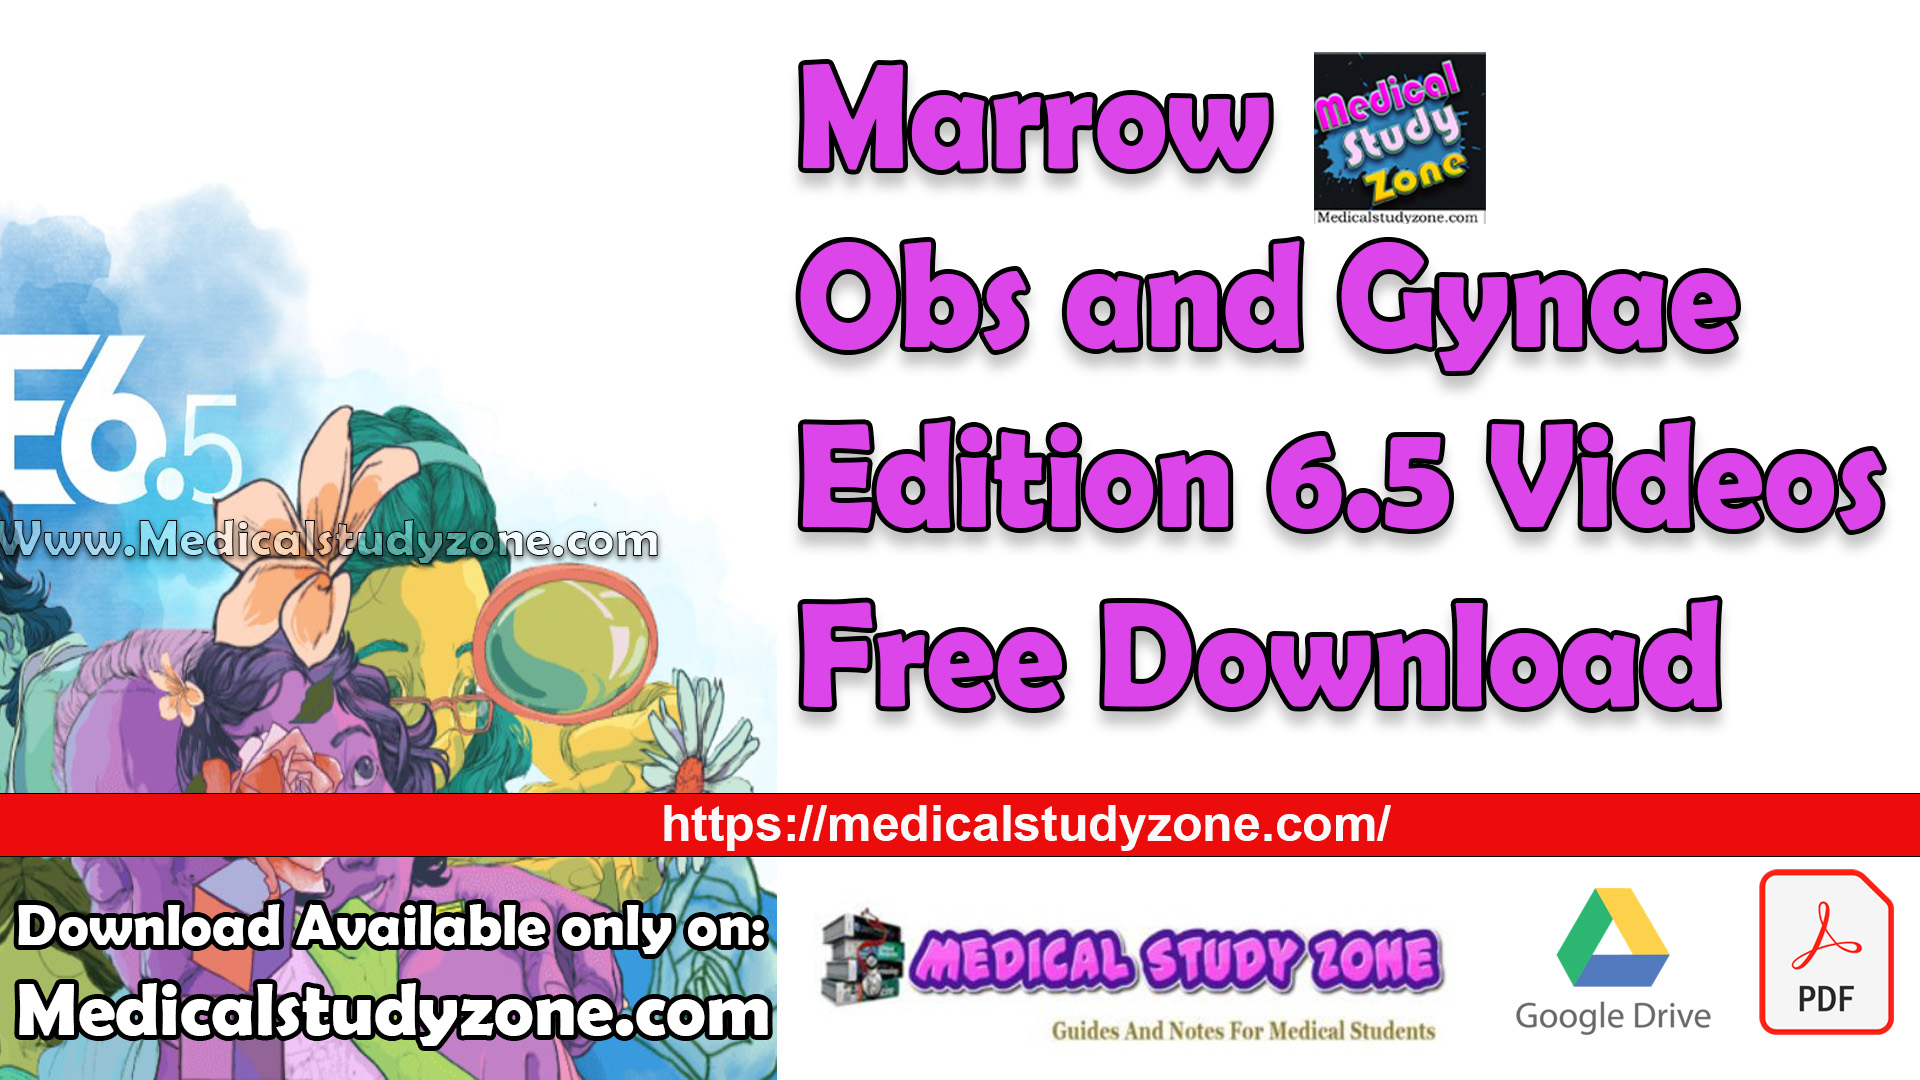 Marrow Obstetrics and Gynaecology Edition 6.5 Videos Free Download